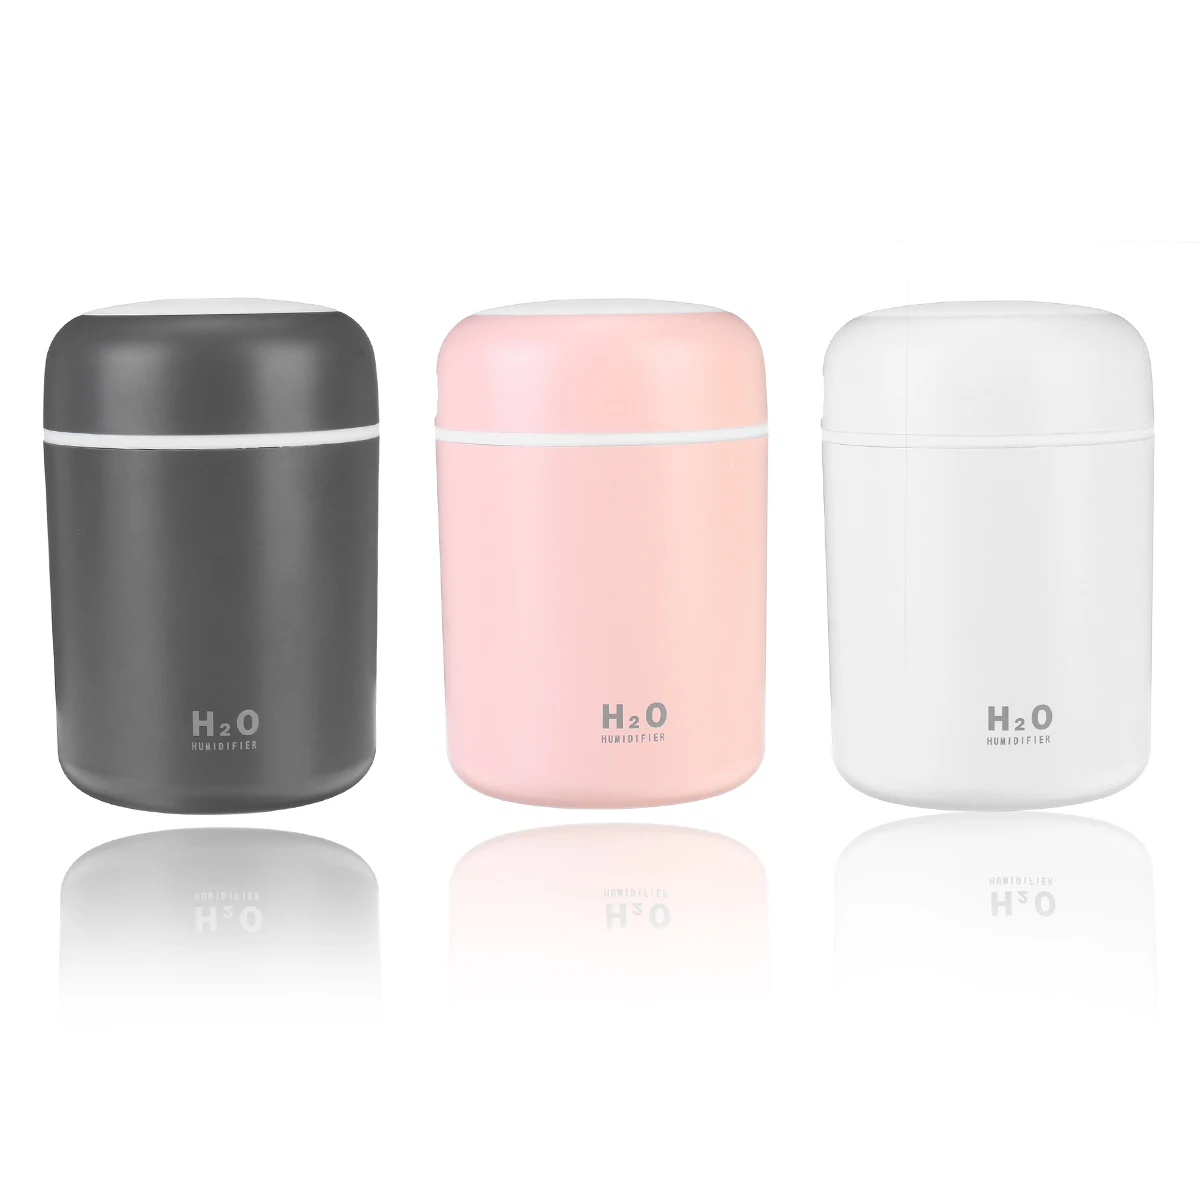 

300ml Portable Humidifier USB Ultrasonic Dazzle Cup Aroma Diffuser Cool Mist Maker Air Humidifier Purifier with Light Timing